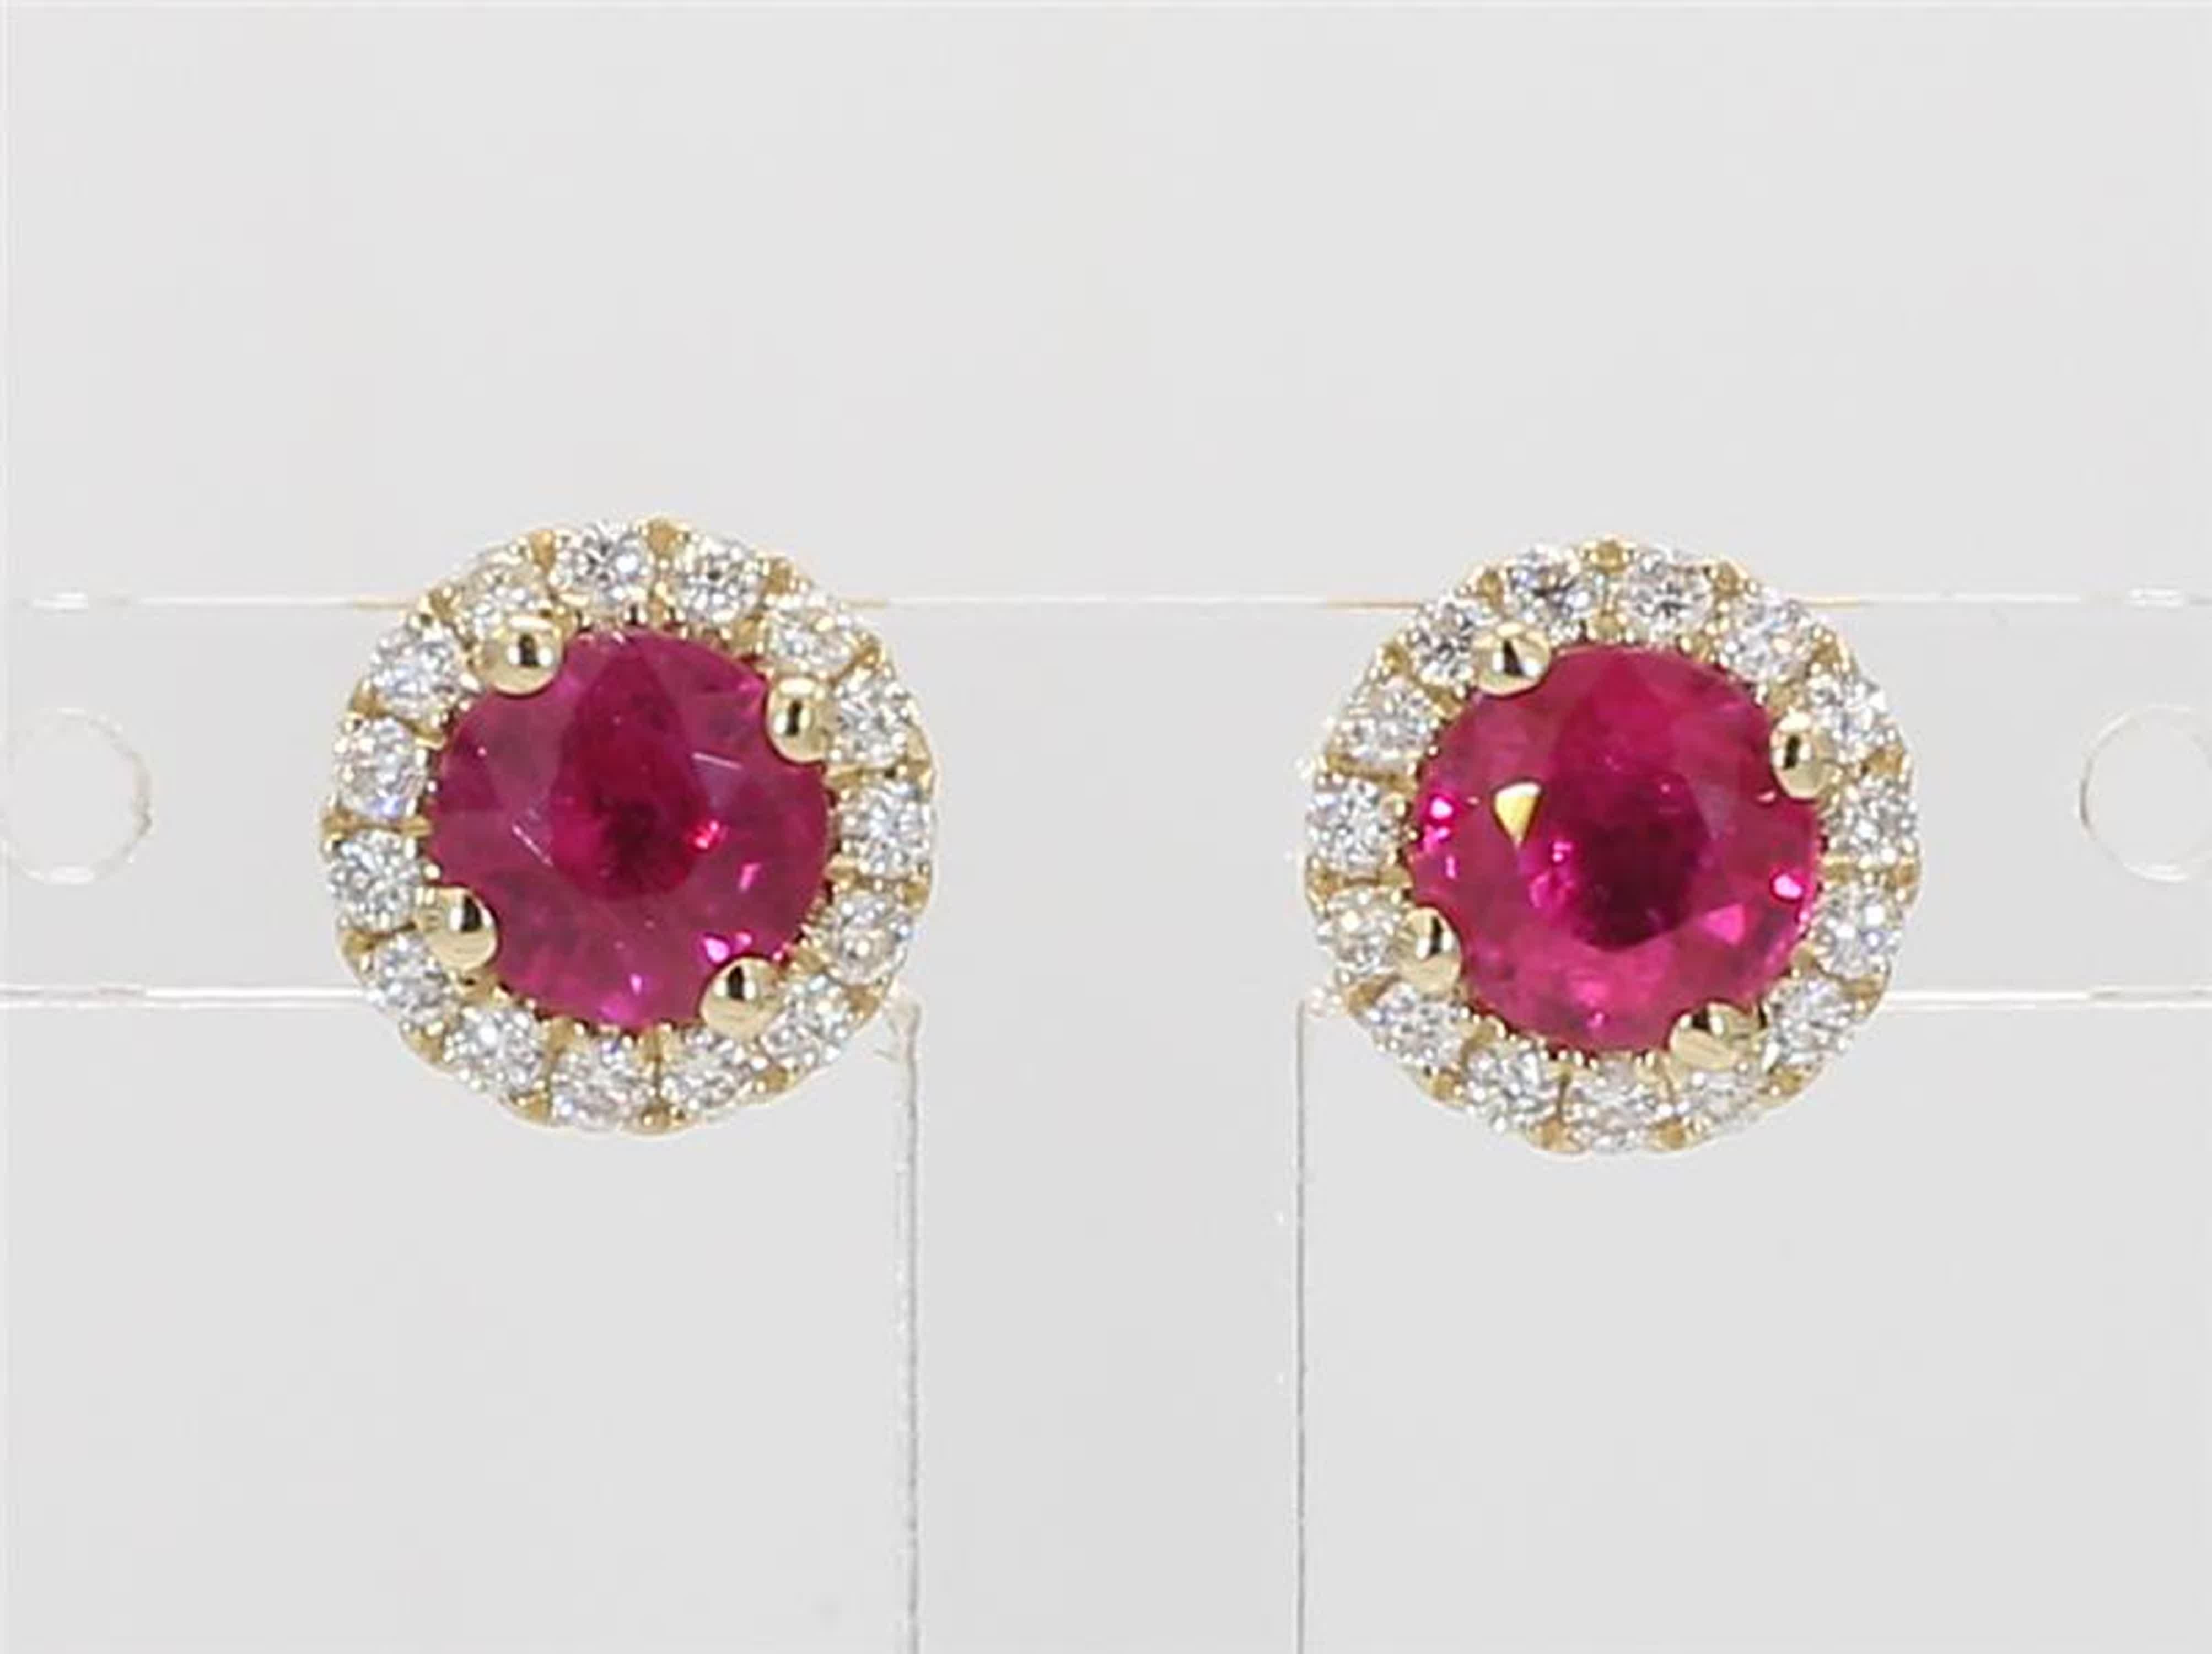 RareGemWorld's classic ruby earrings. Mounted in a beautiful 14K Yellow Gold setting with natural round cut red ruby's. These ruby's are surrounded by a halo of natural round white diamond melee. These earrings are guaranteed to impress and enhance